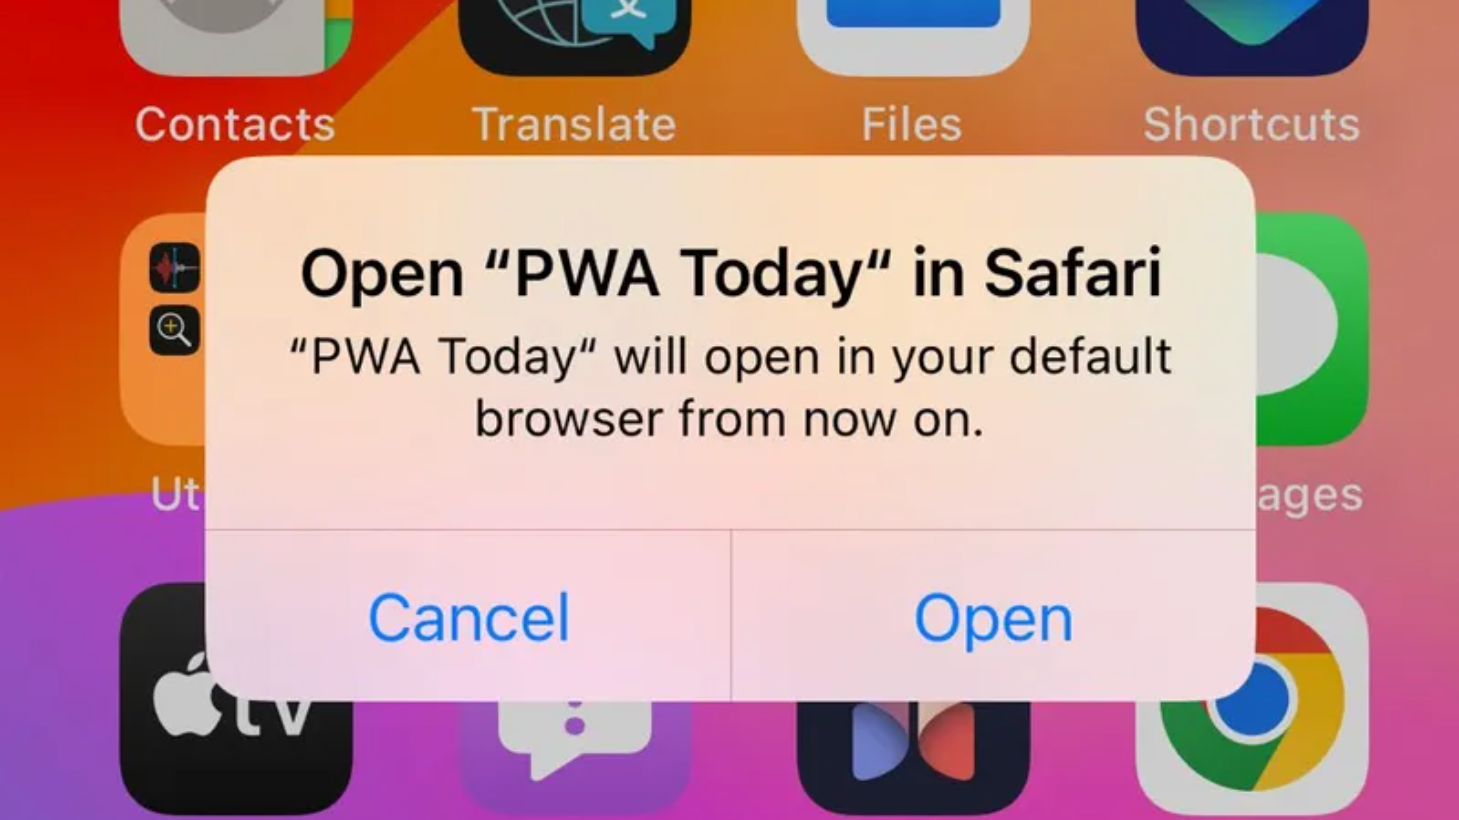 A prompt on the home screen: Open “PWA Today” in Safari “PWA Today” will open in your default browser from now on.